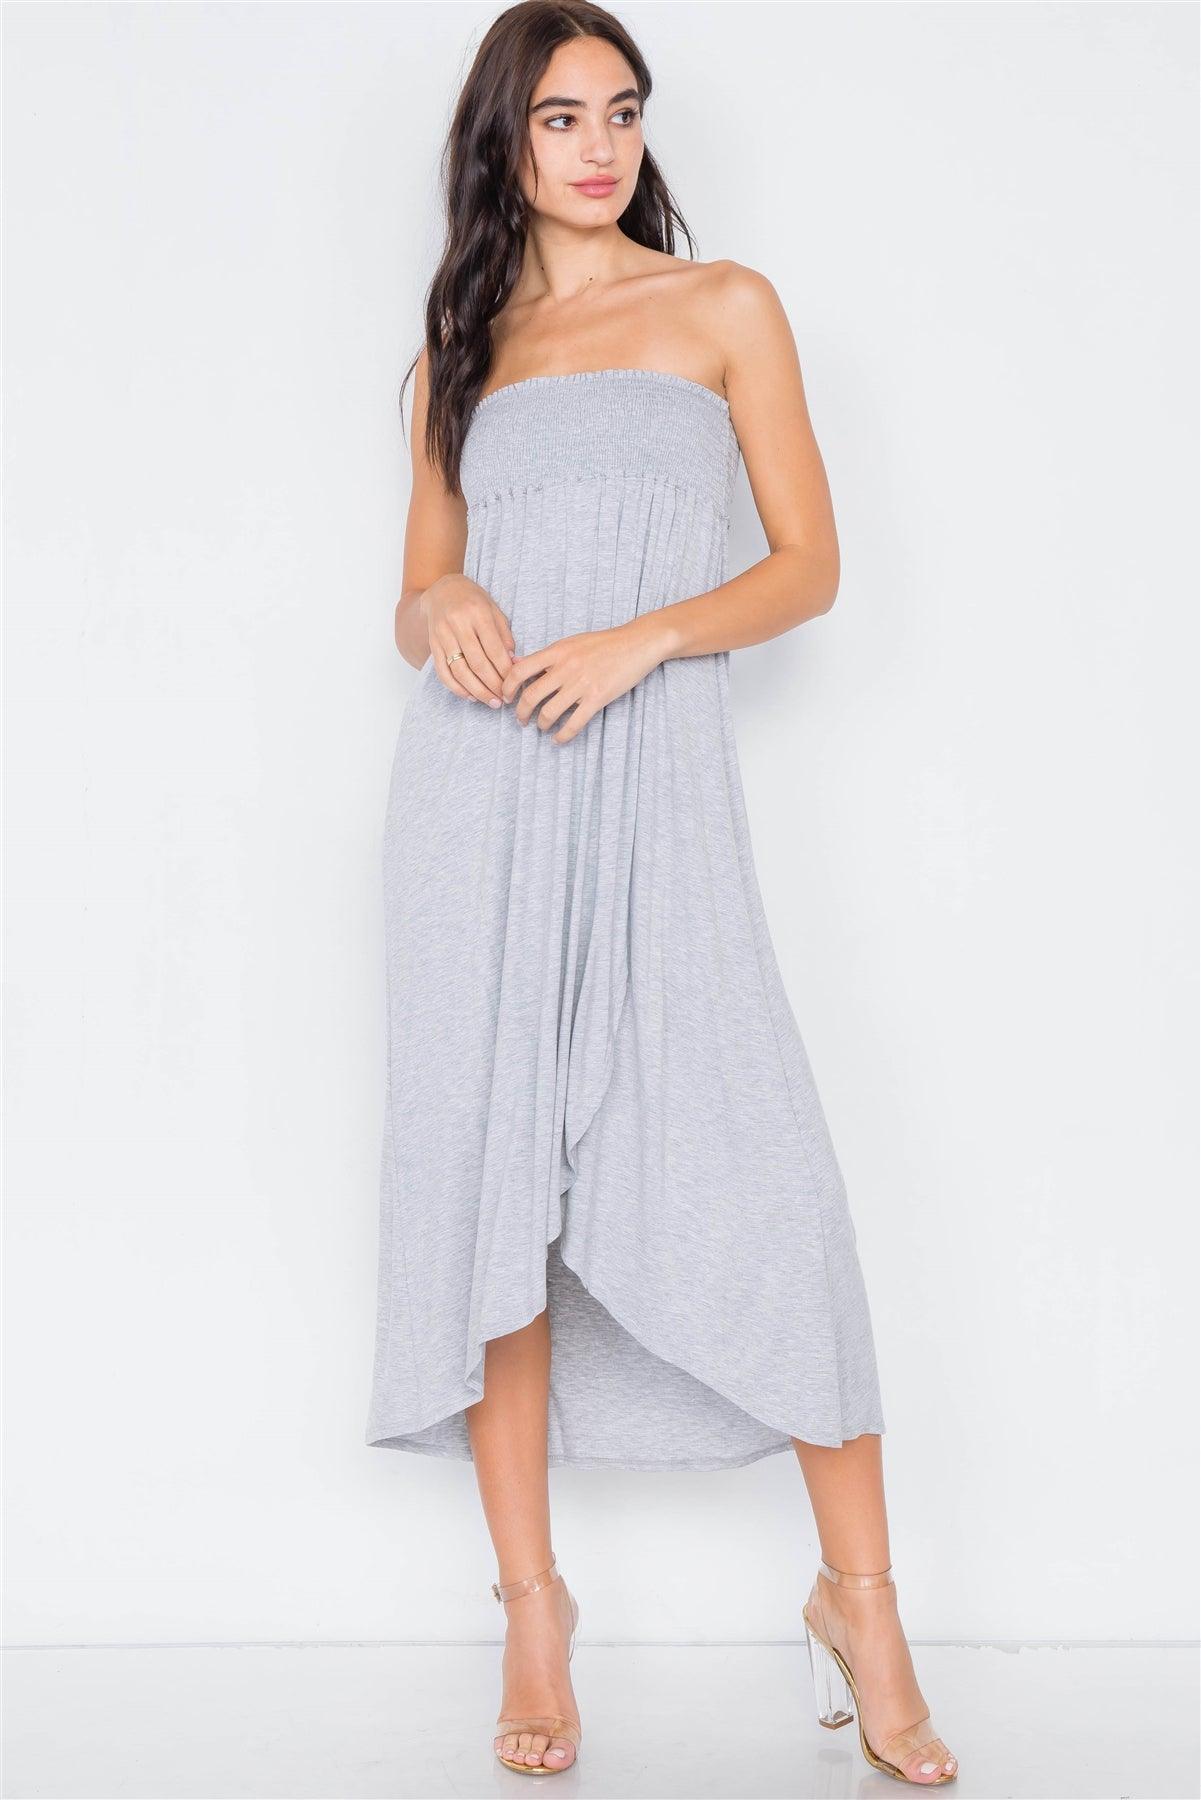 Heather Grey Off-The-Shoulder Ruched Tube Top Midi Dress /1-2-2